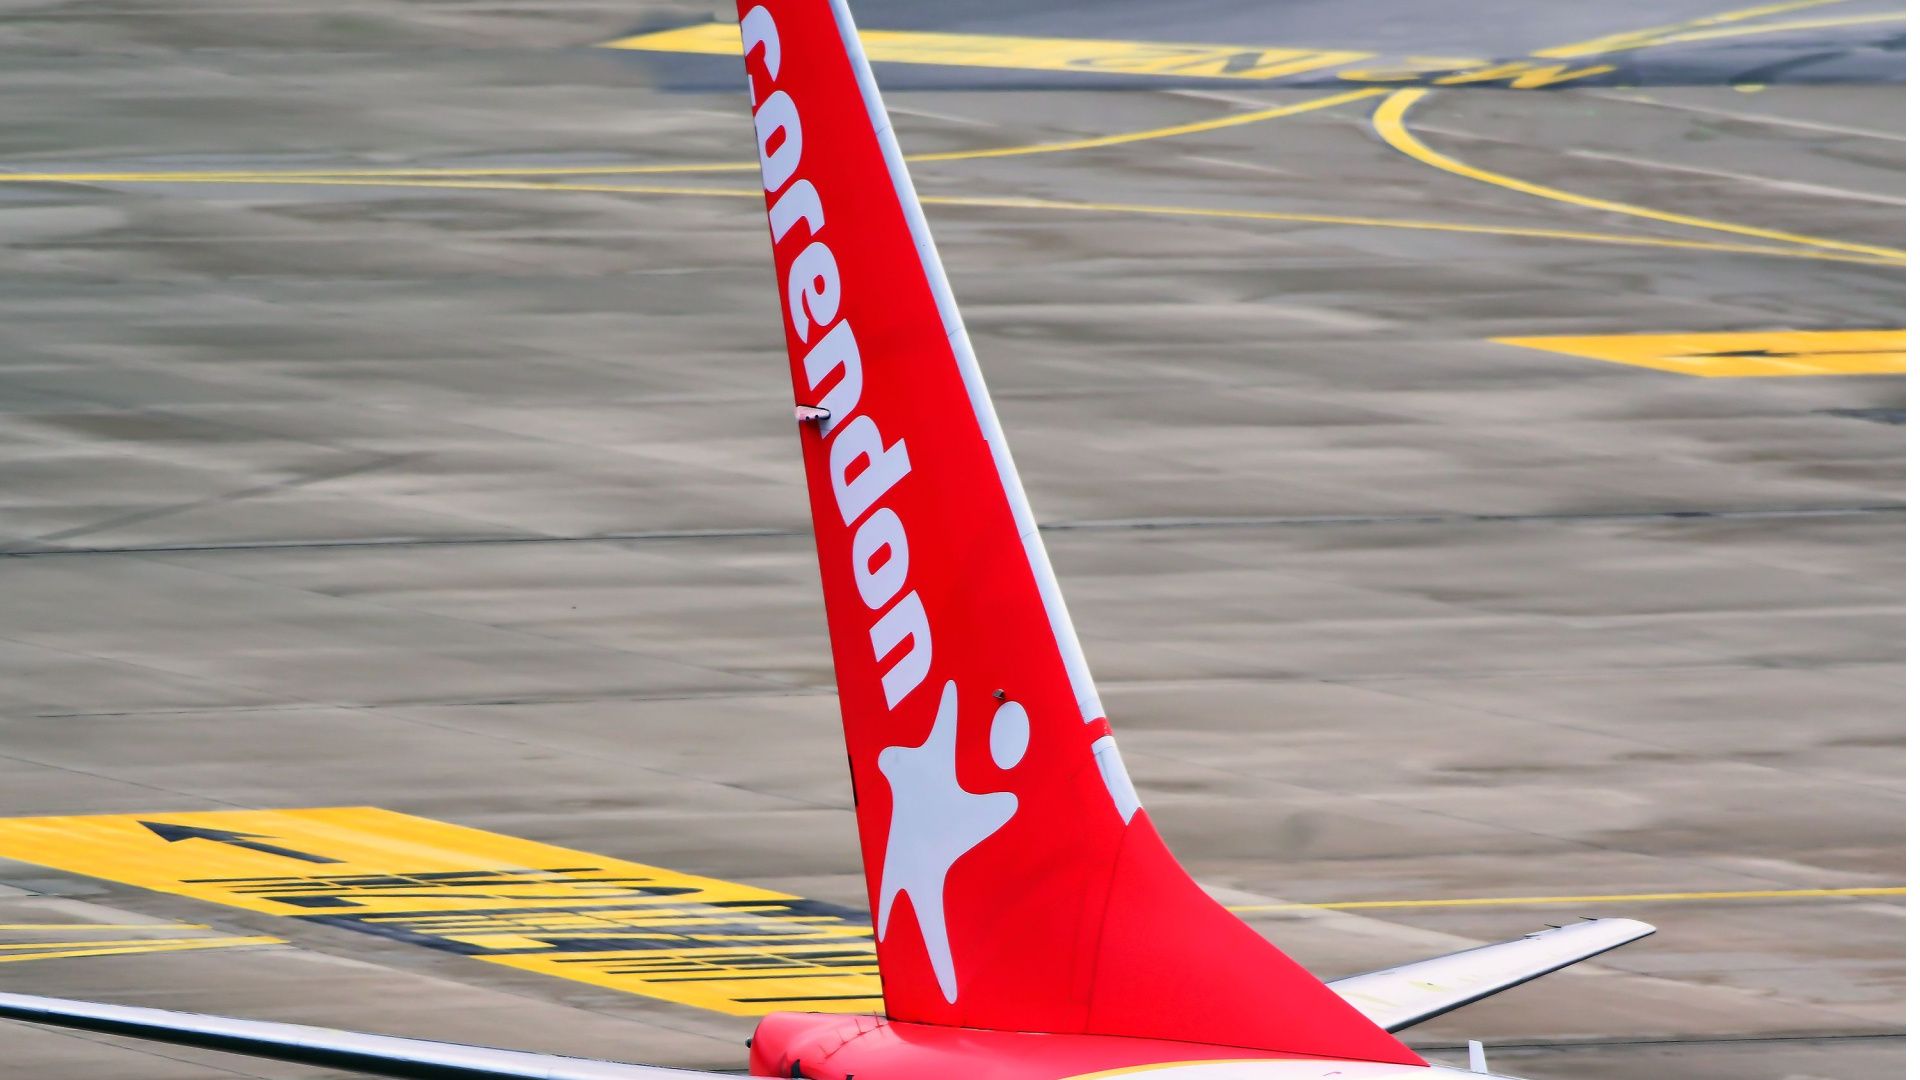 Corendon Airlines Tail